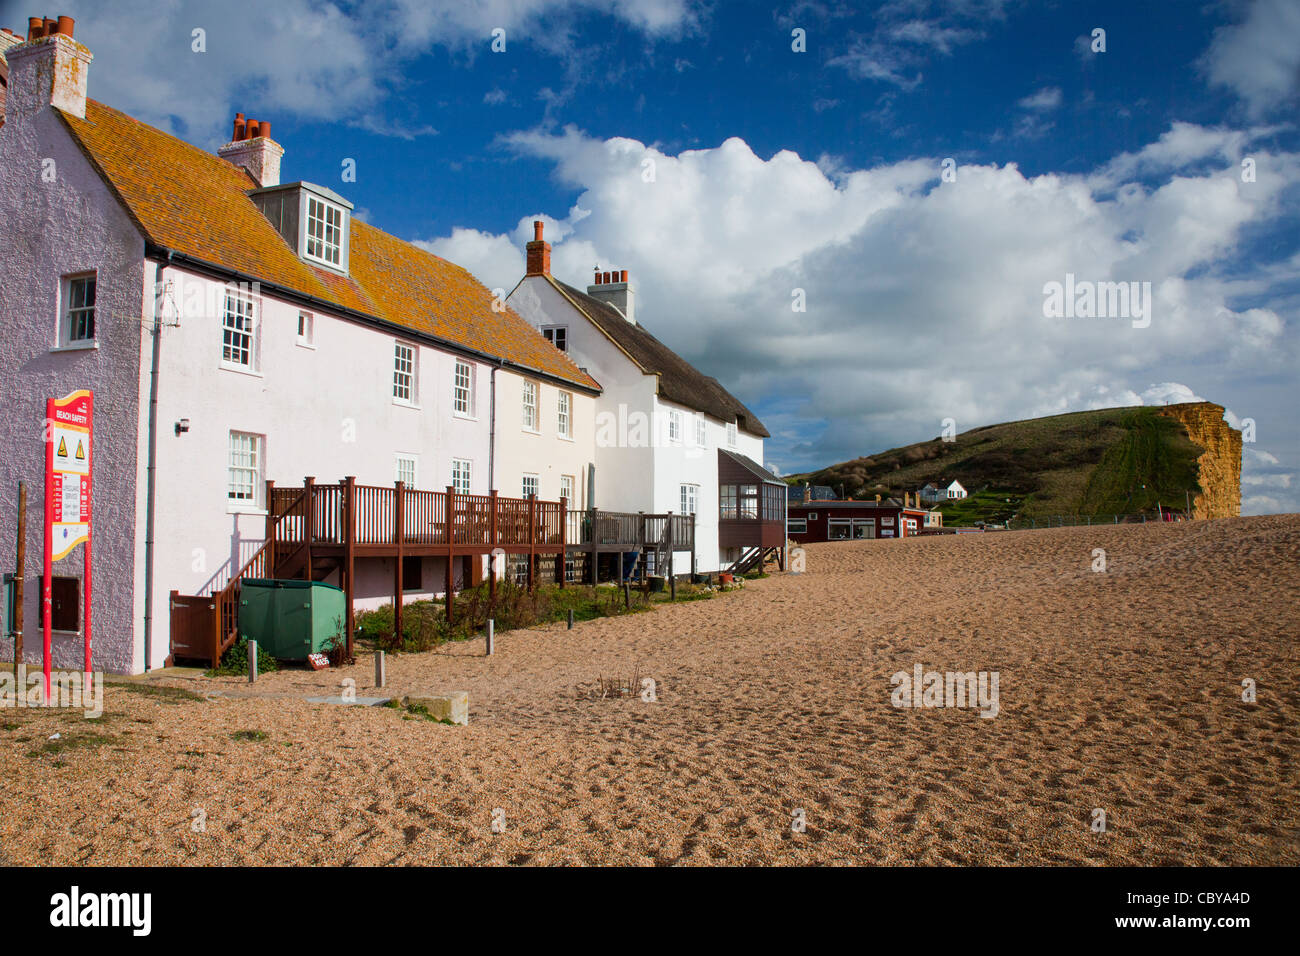 Seafront cottages on the shingle beach at West Bay near Bridport in Dorset, England, UK Stock Photo